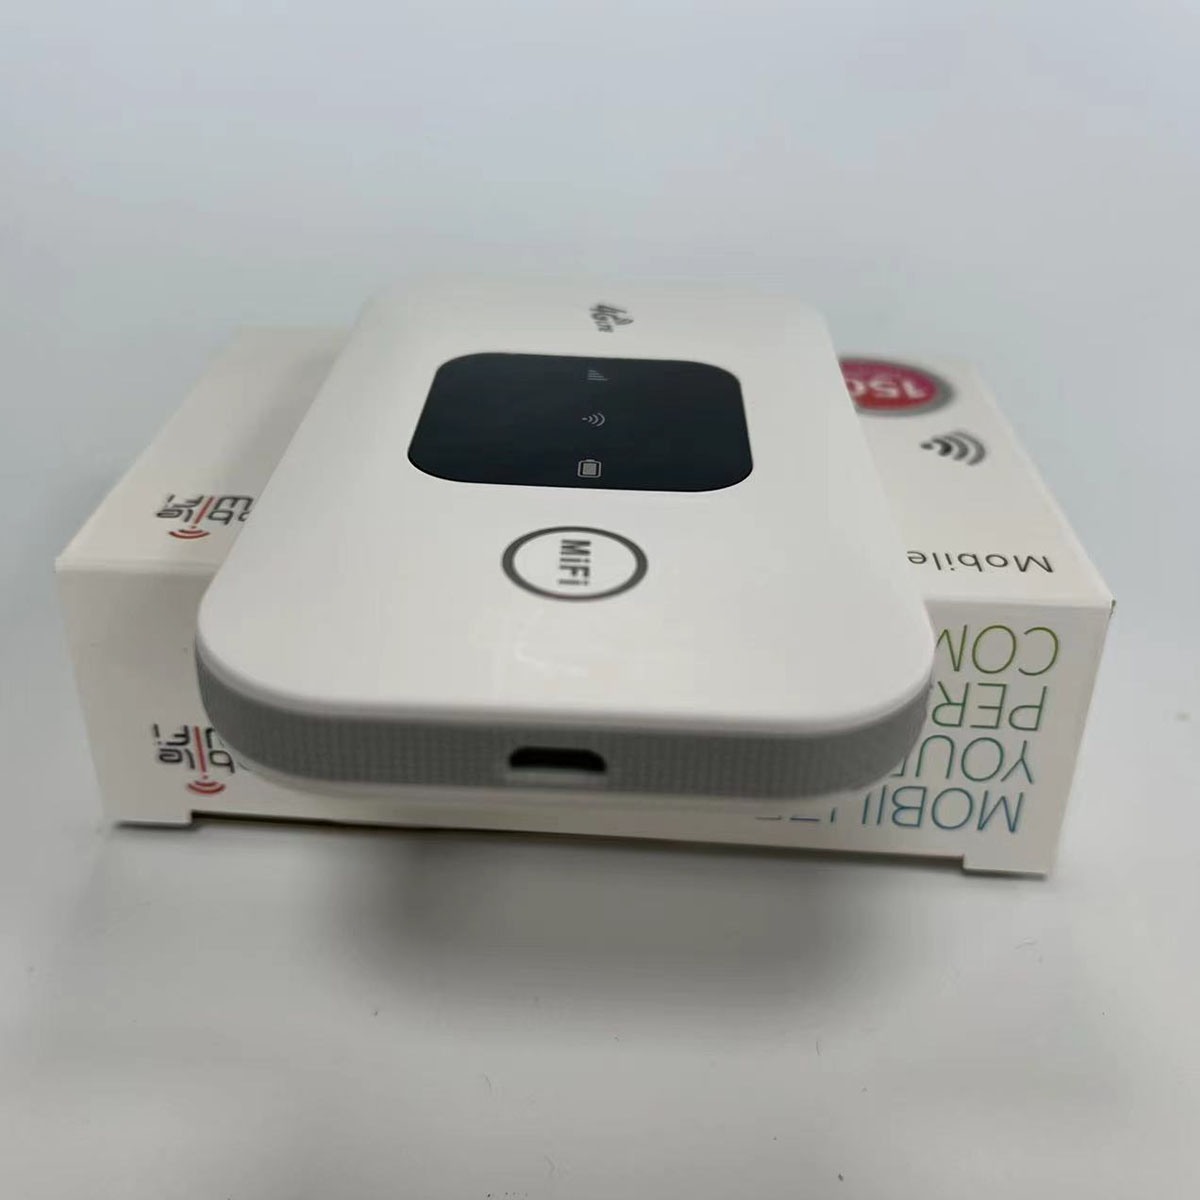 DECOME Y- MF800 WLAN router